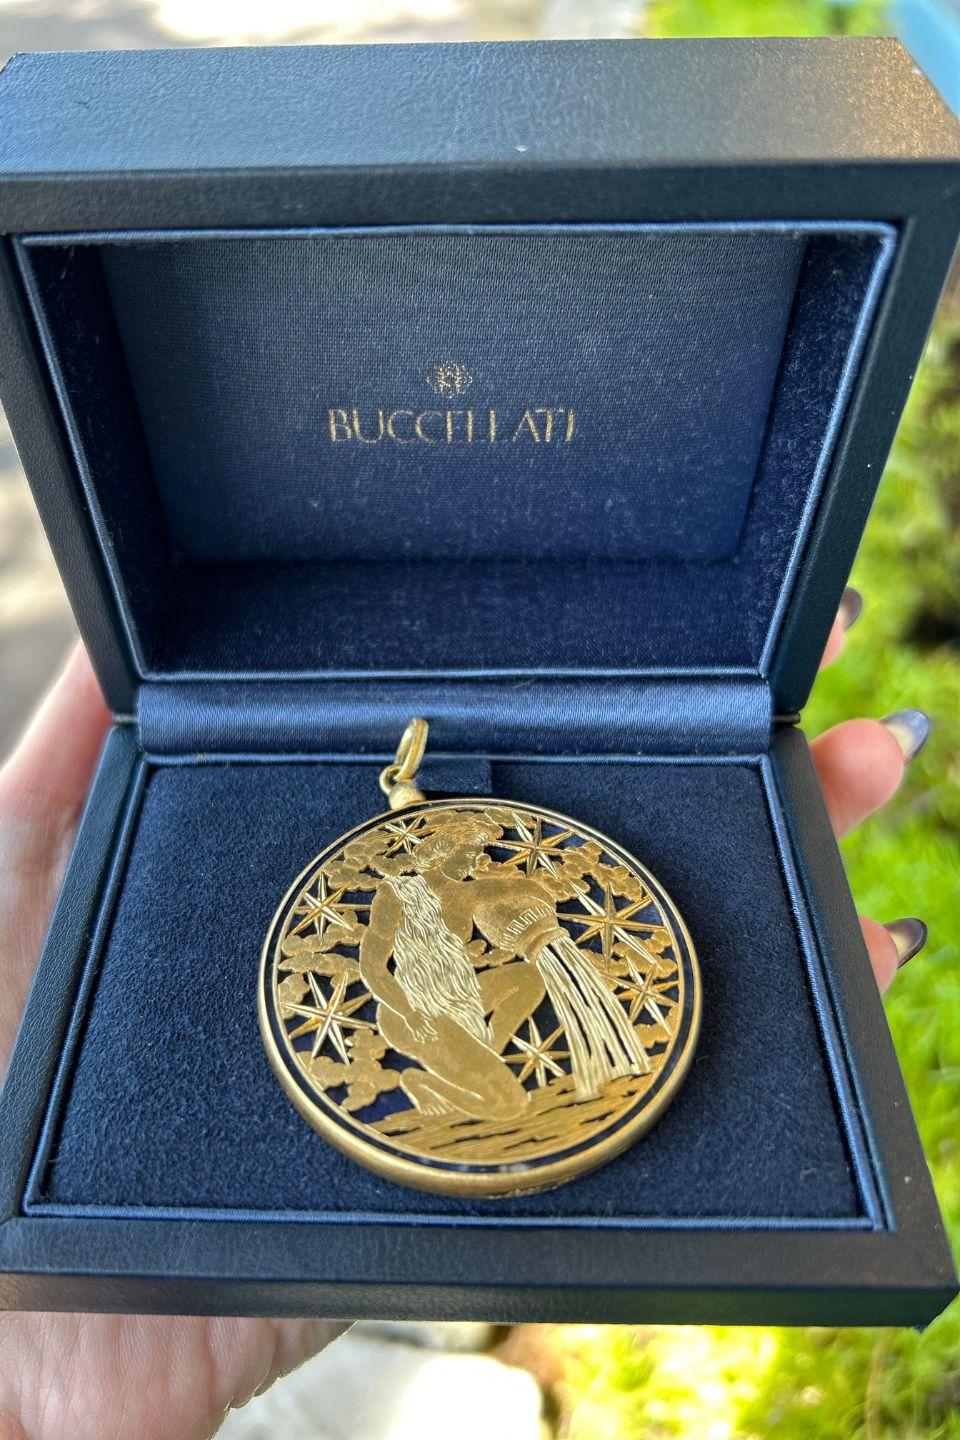 Condition: Excellent (Like new)  Only worn a couple times (Comes with original box)

Features:
Buccellati Vintage 18K Yellow Gold Zodiac Aquarius Coin Pendant (One of a Kind)
Chain not included
18K Yellow Gold
Made in Italy